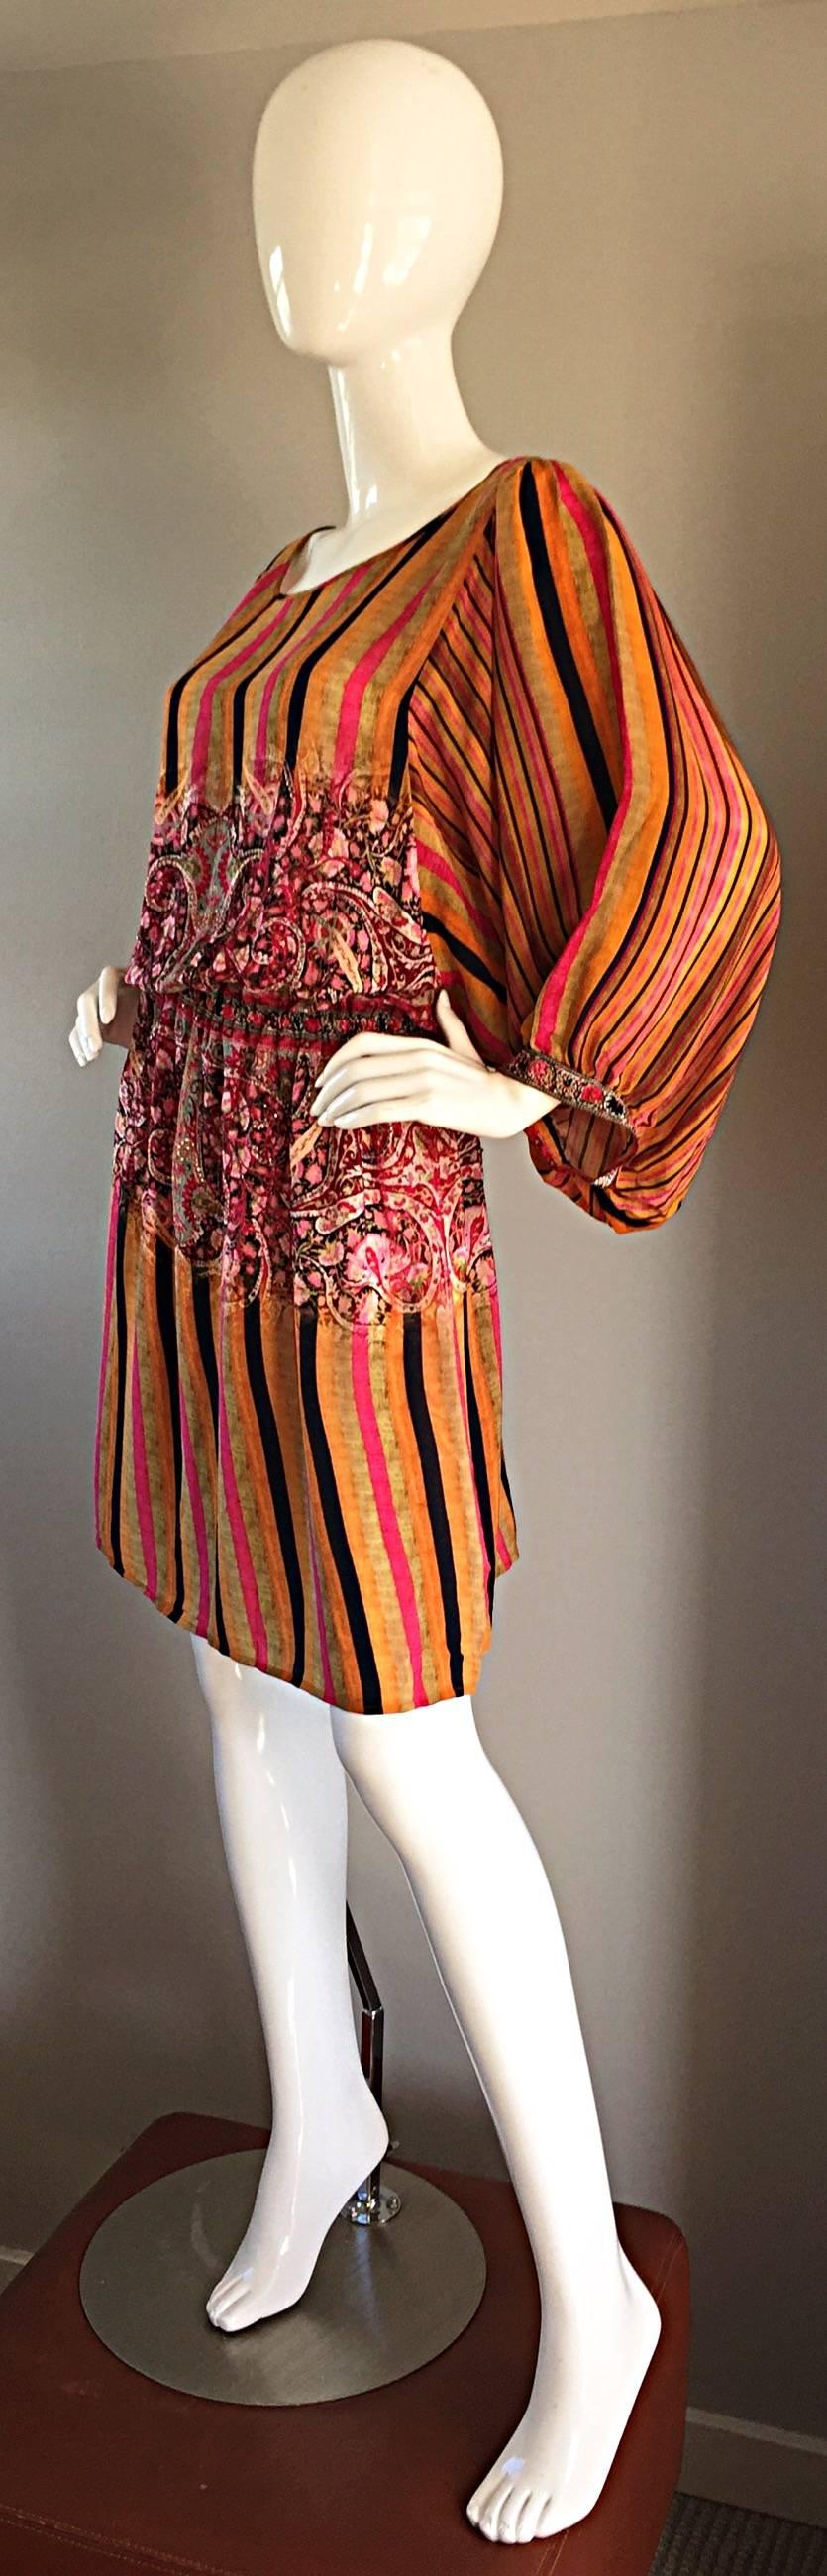 Incredible Matthew Williamson beaded tunic! Ethnic inspired, with a variety of vertical stripes throughout. Paisley and floral print at midsection, with hand-sewn beading throughout. Looks amazing on! Elastic waistband, that stretches to fit. Large